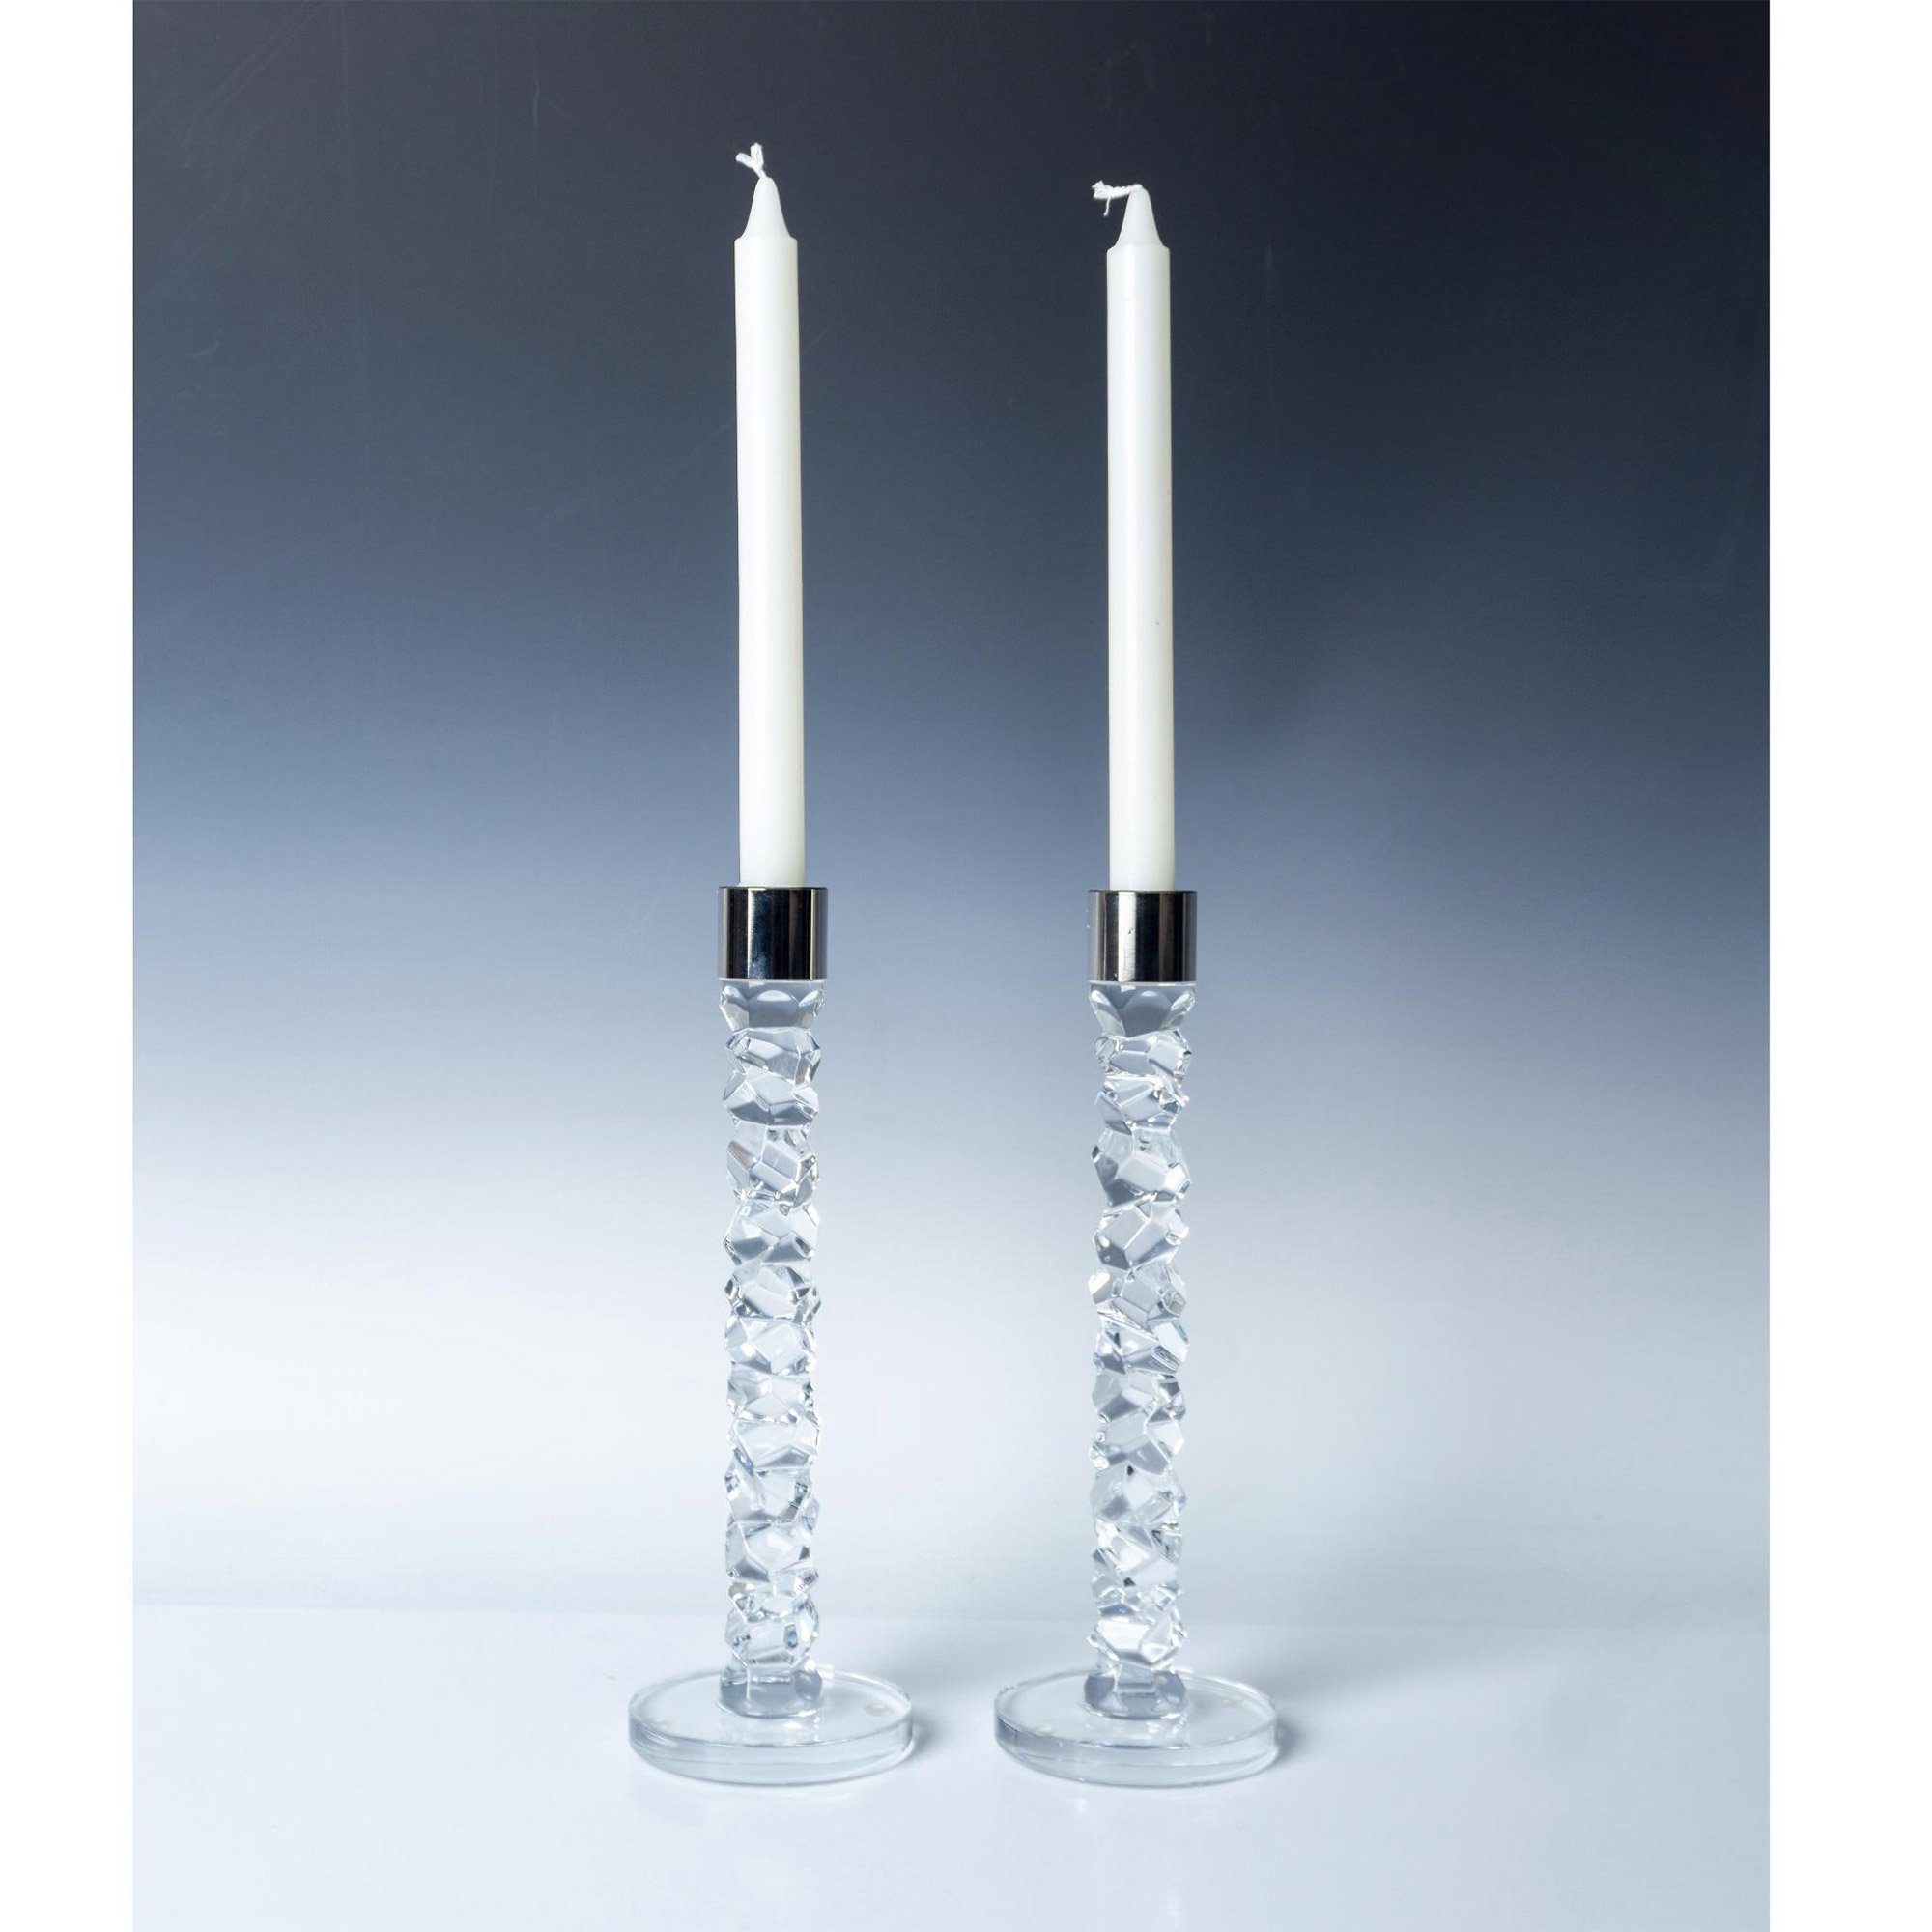 Pair of Orrefors Crystal Candle Sticks, Carat Pattern - Image 3 of 4